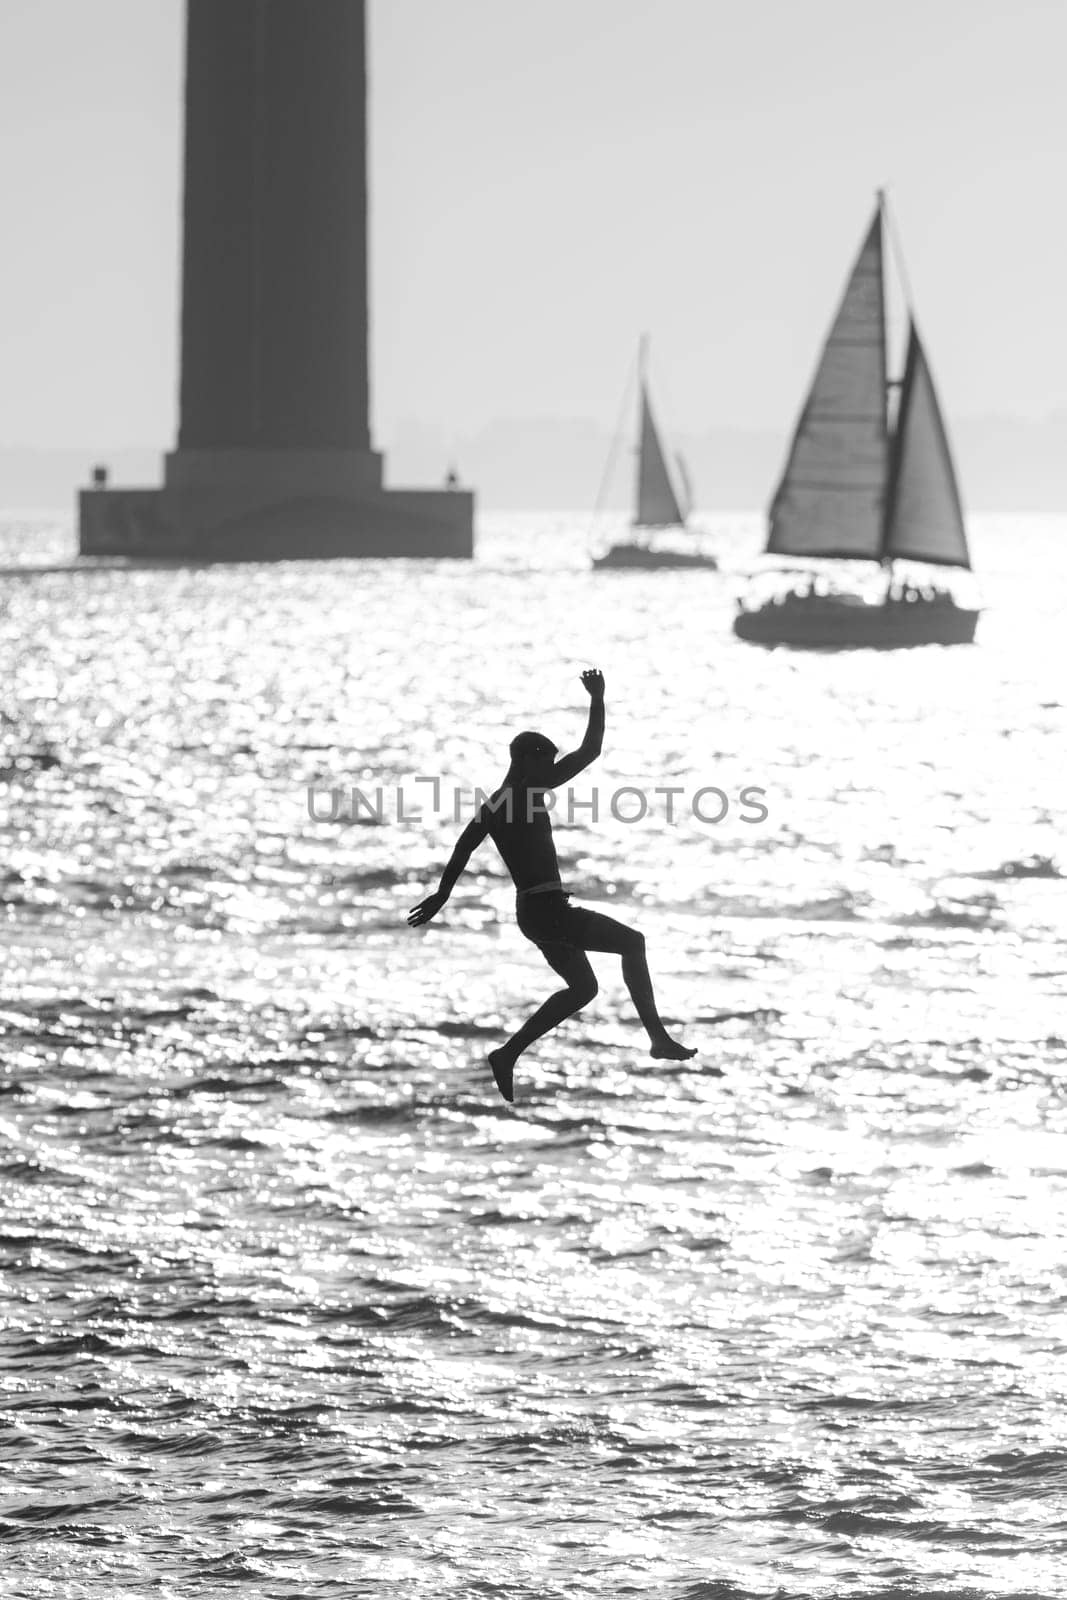 Teenage boy jumping in the water from a pier - black and white image. Vertical shot